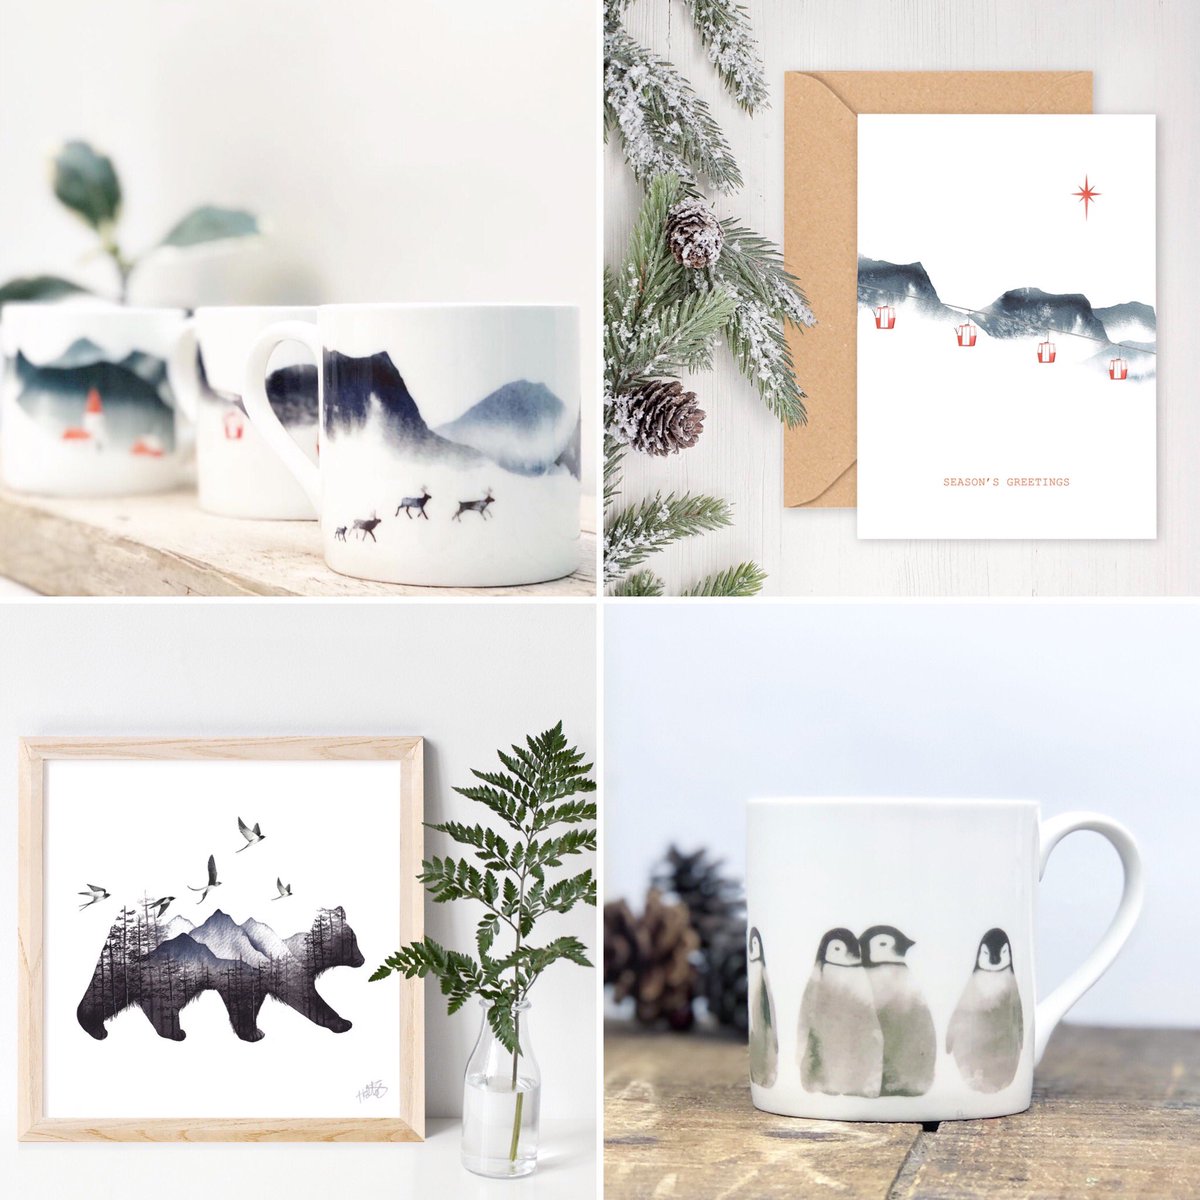 Christmas is fast approaching so make sure you pop over to my Etsy shop soon! Thank you so much for your orders this week! I feel like the post office is my second home 😘